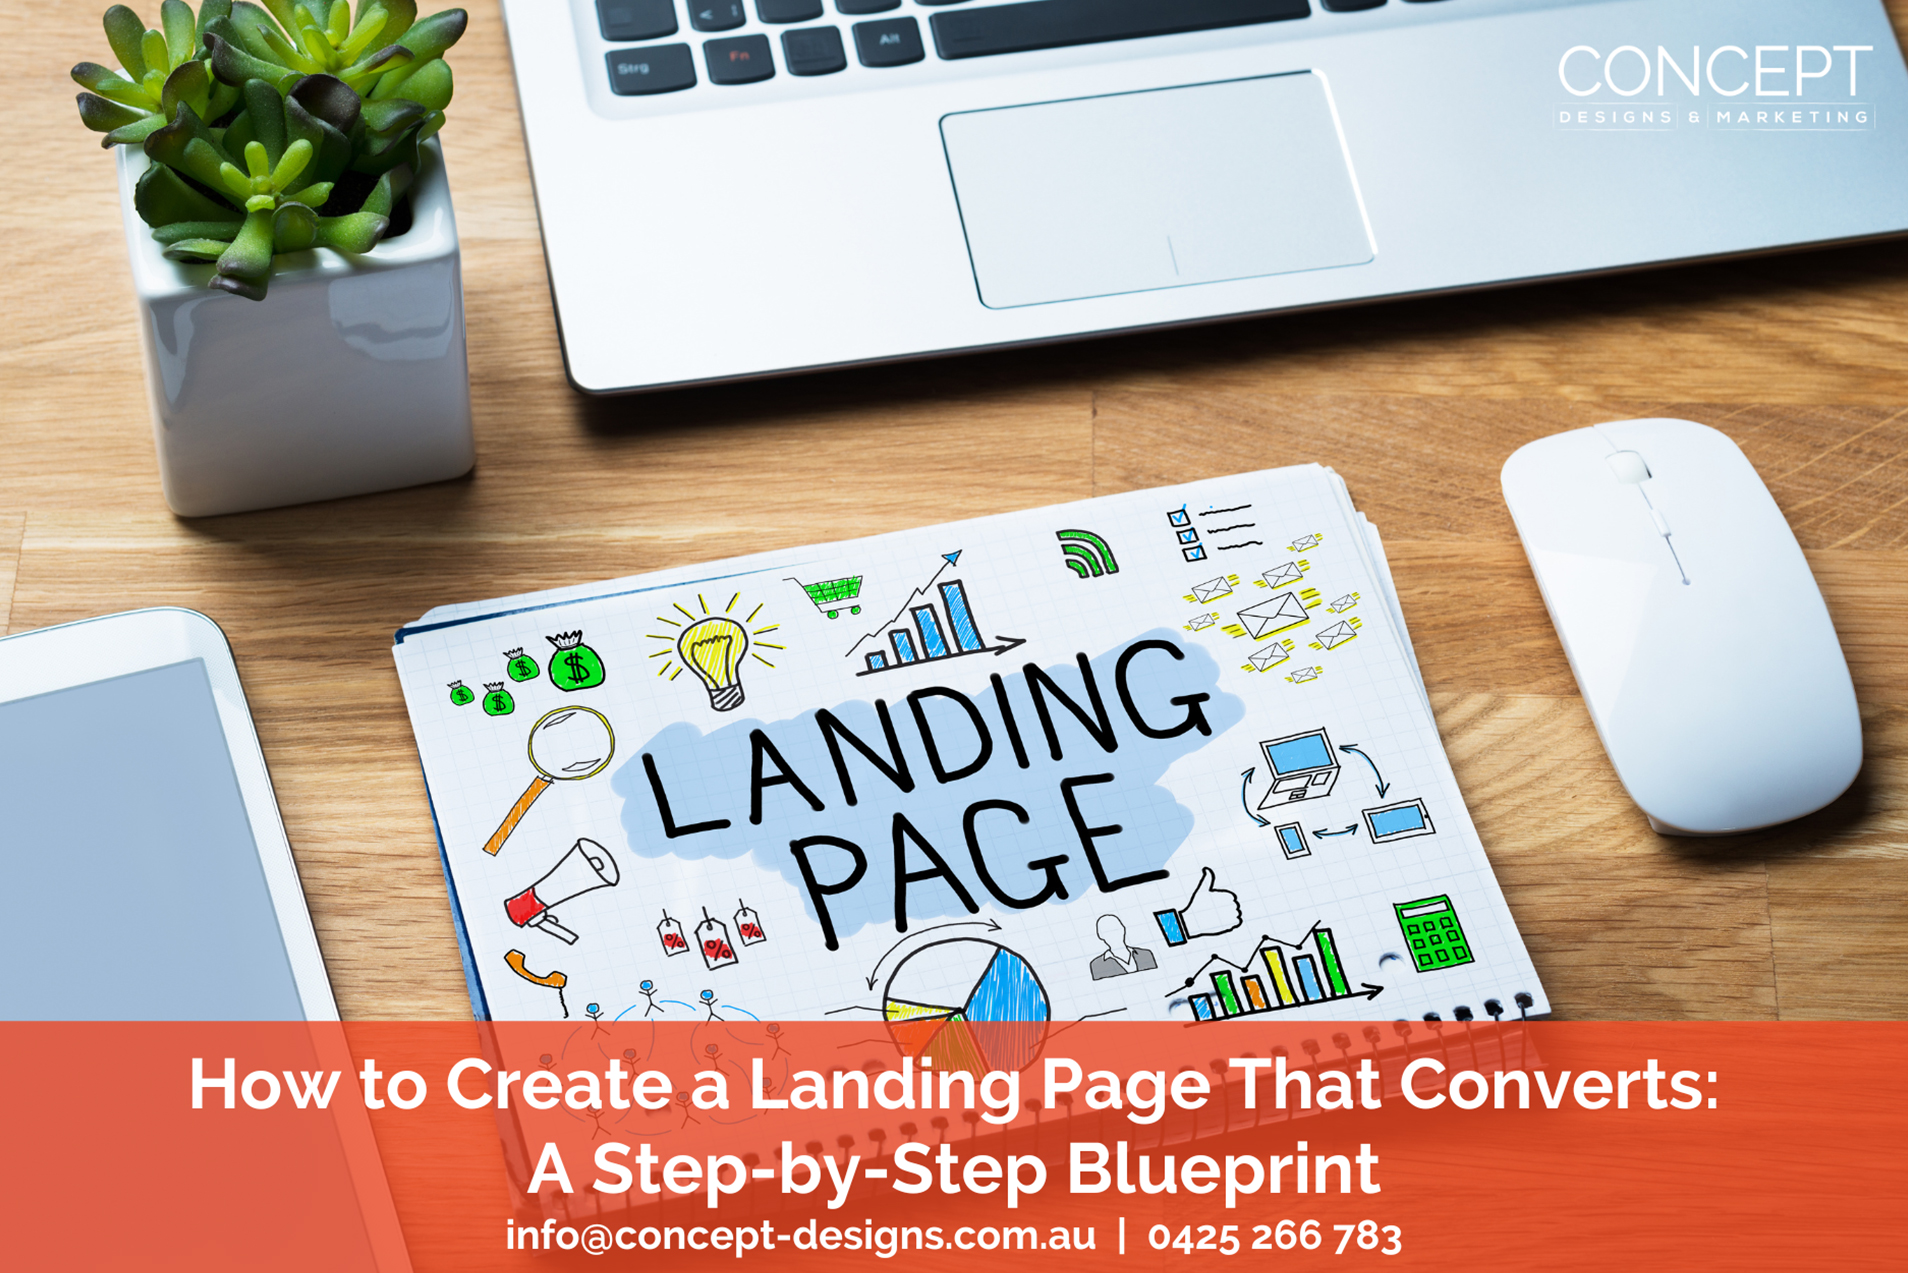 How to Create a Landing Page That Converts: A Step-by-Step Blueprint